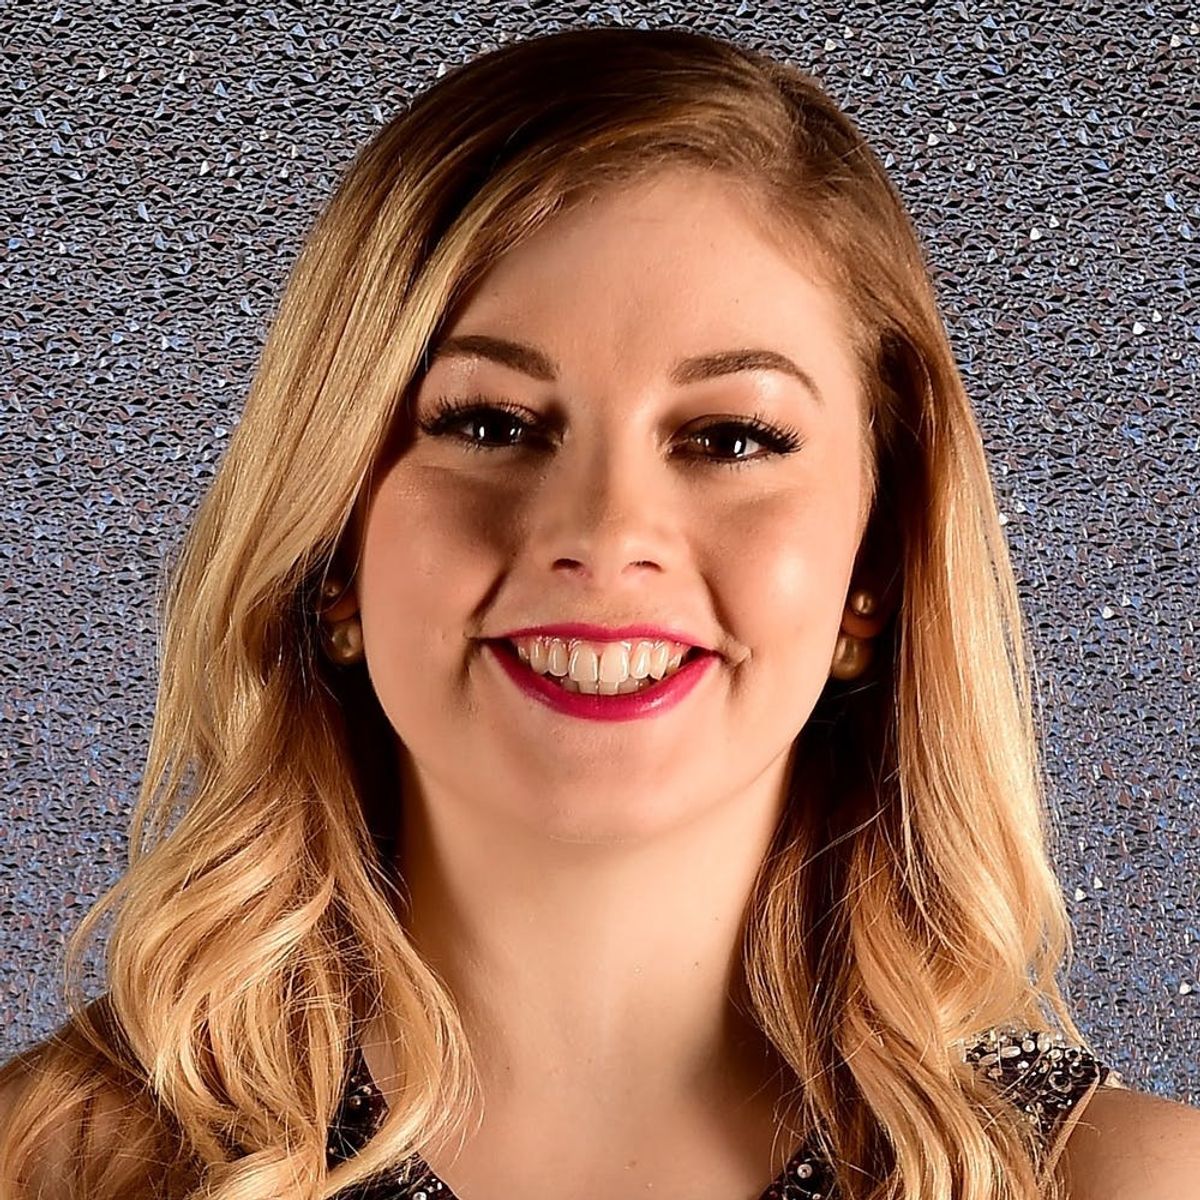 Gracie Gold Shares the Heartbreaking News That She Won’t Return to the Ice for the 2018 Olympics